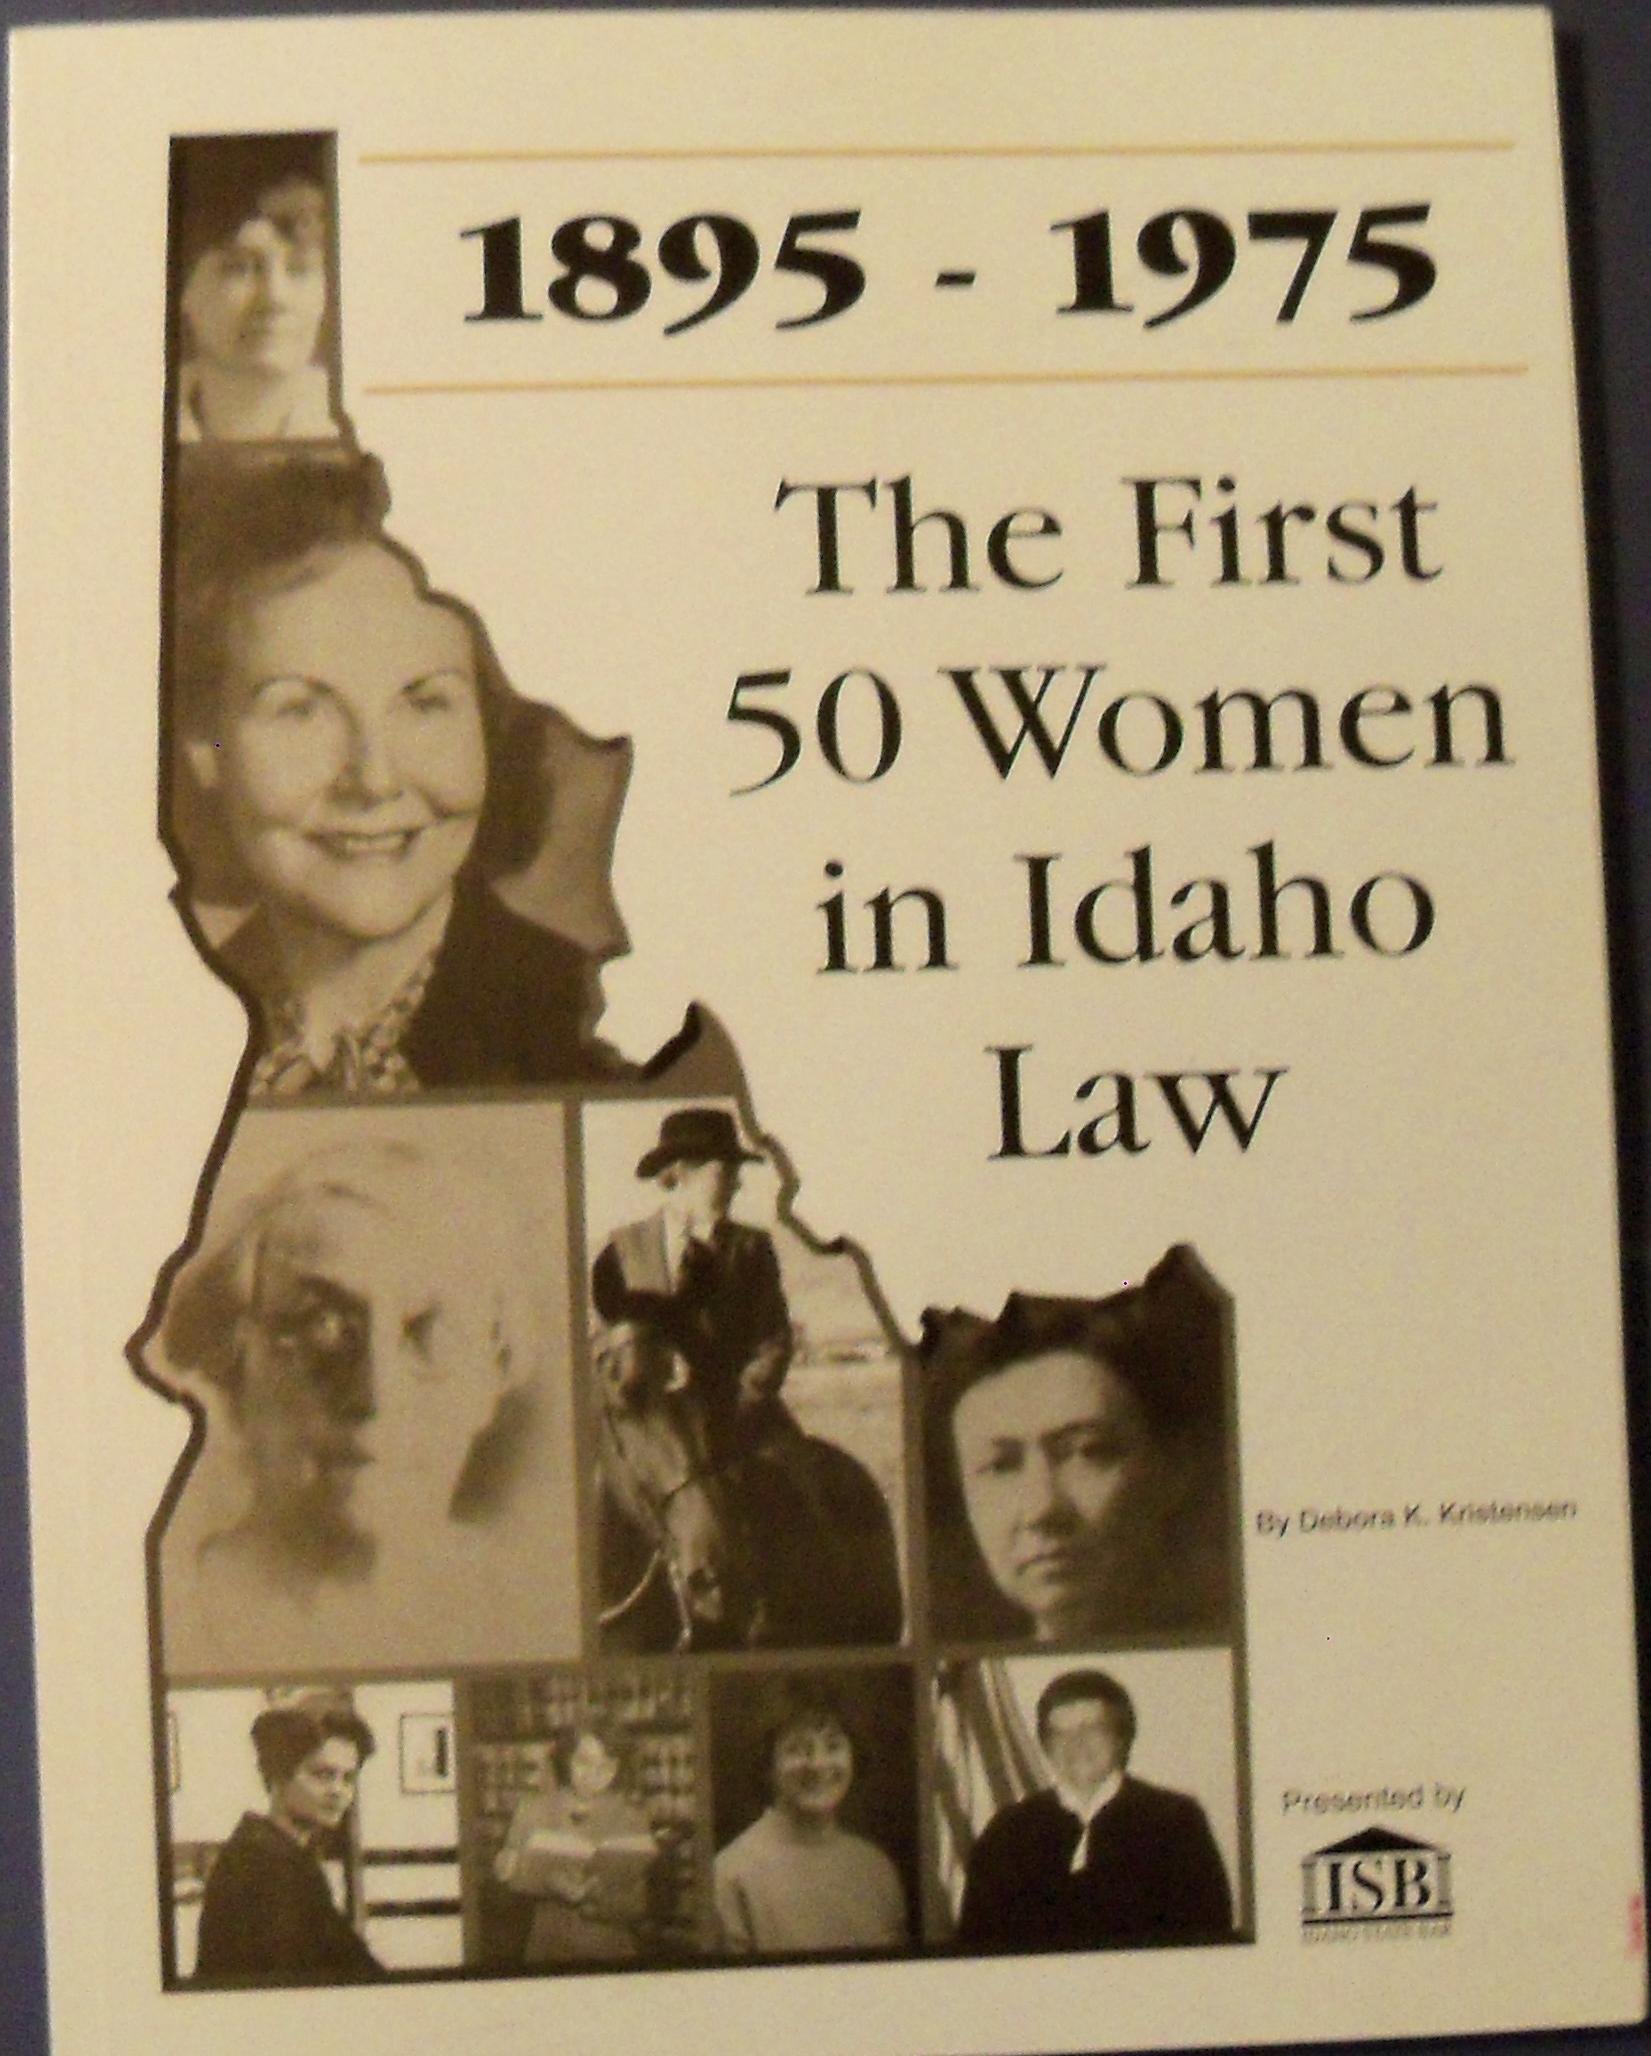 The first 50 women in Idaho law: 1895 - 1975 (book cover)